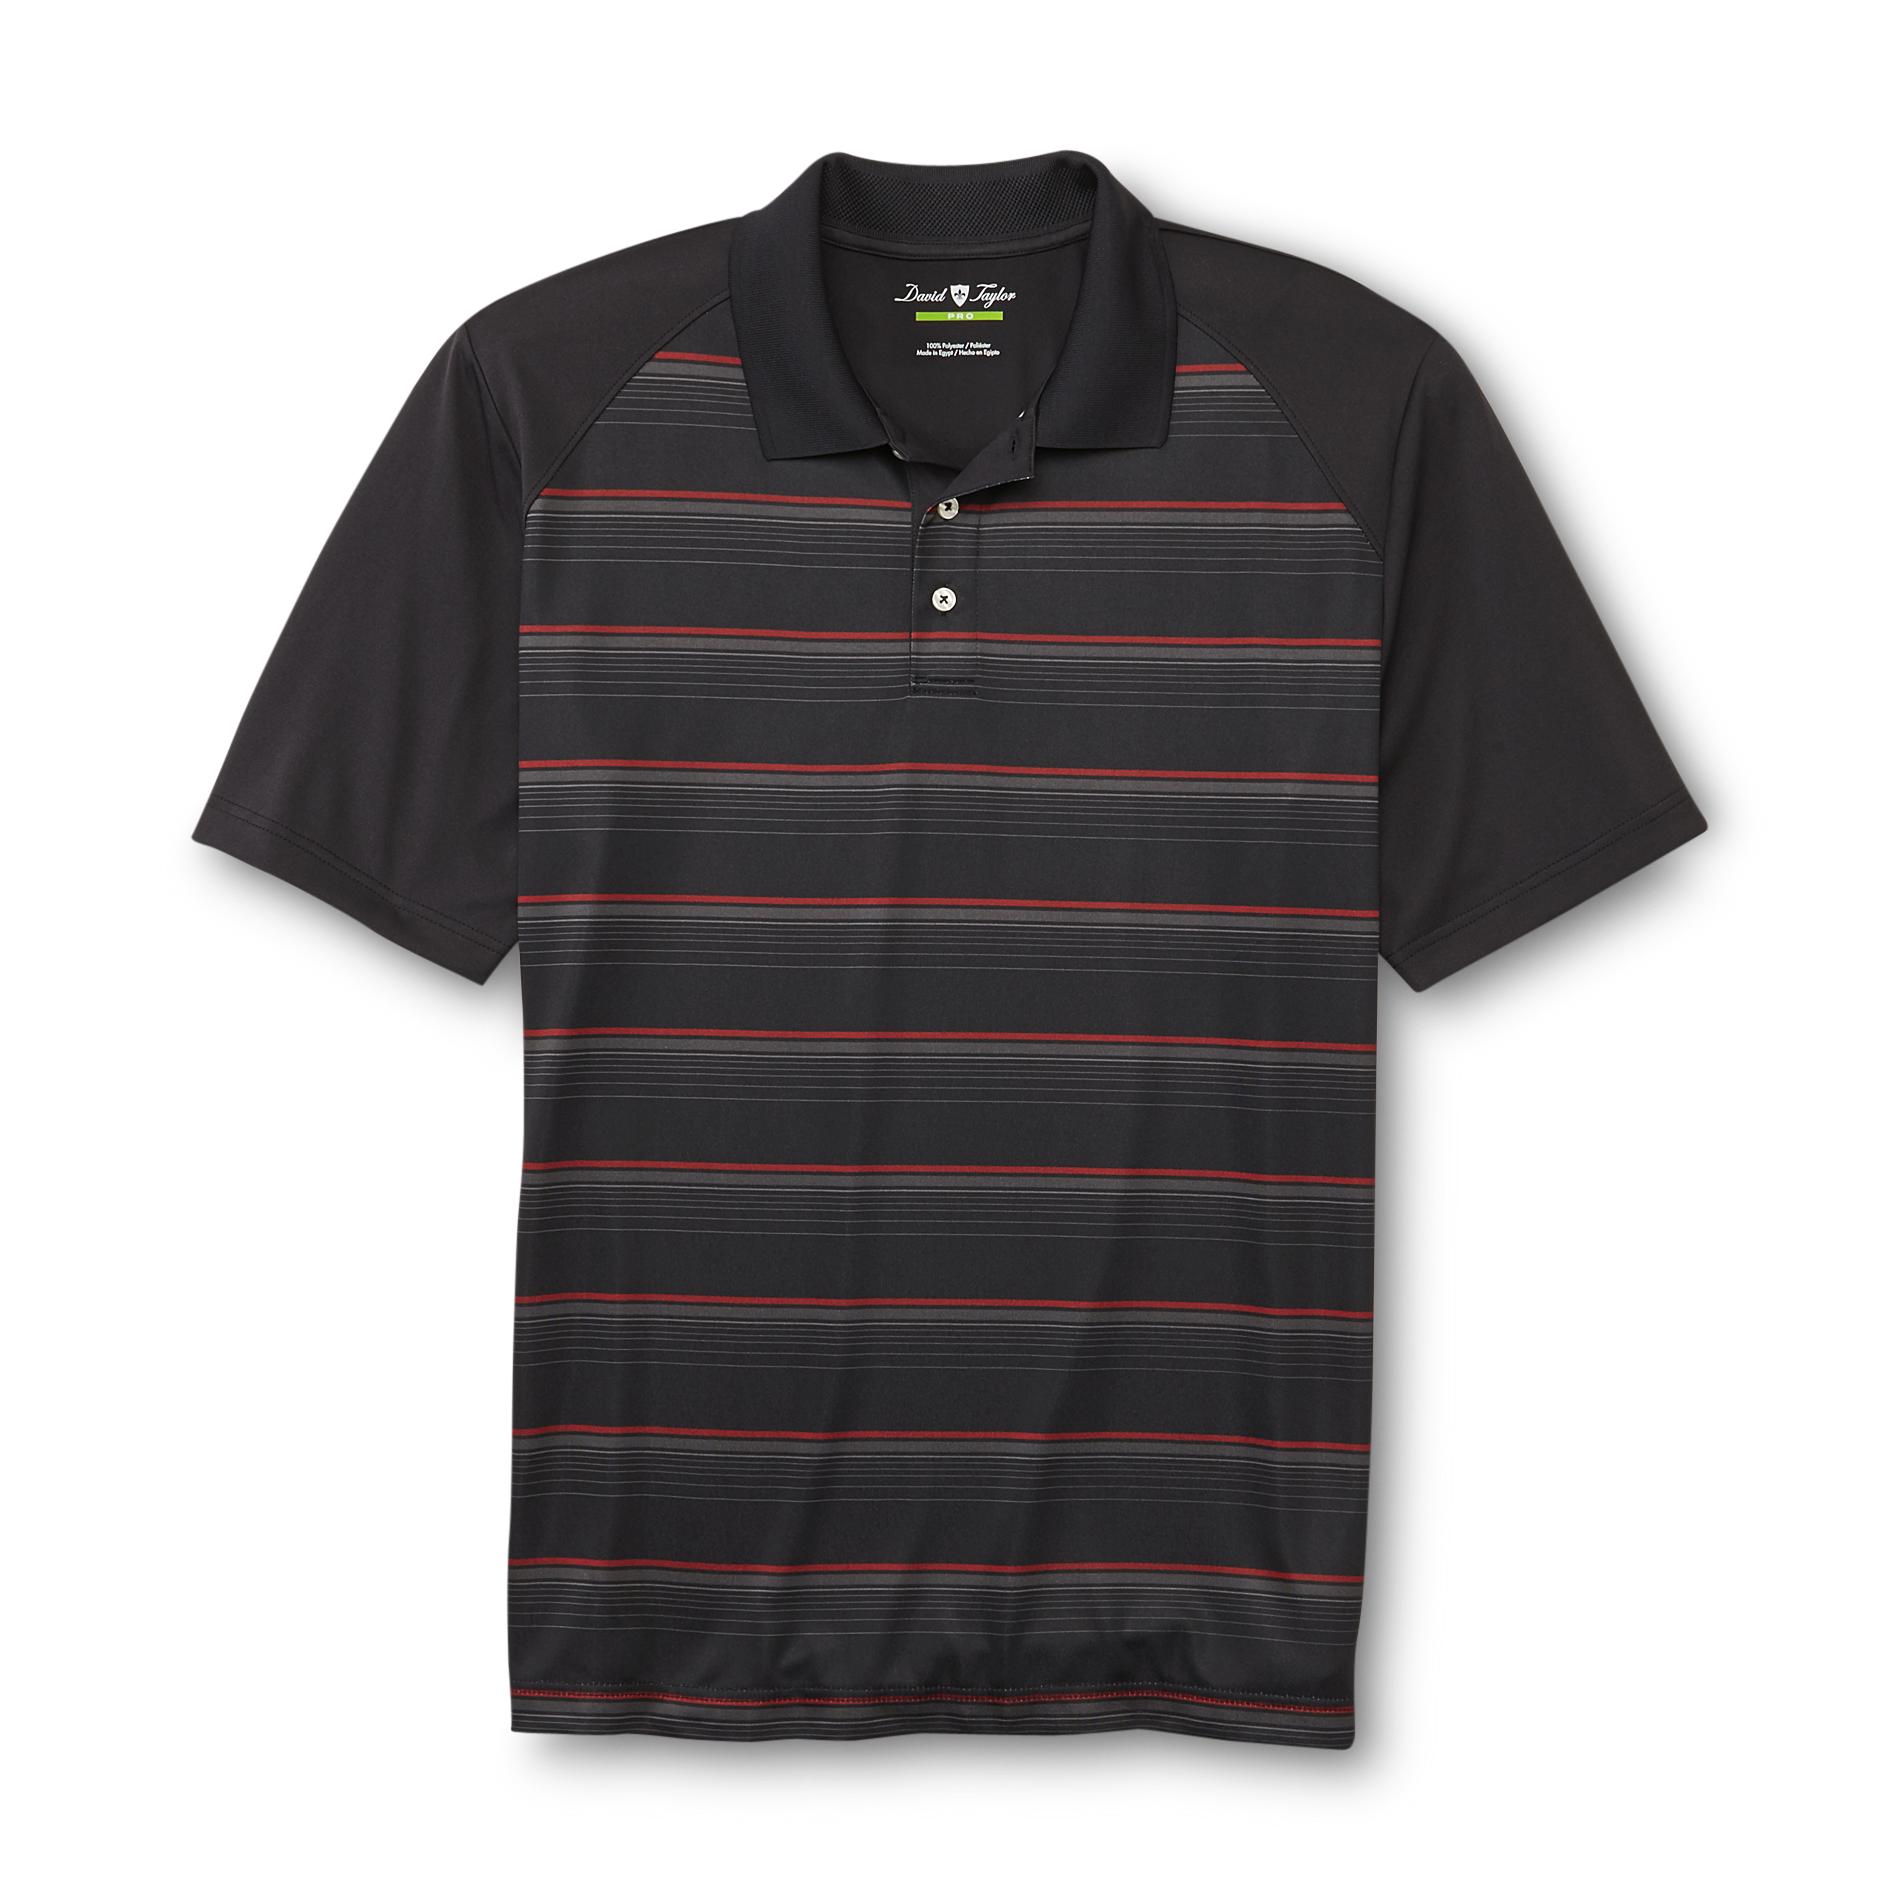 David Taylor Collection Men's Jersey Polo Shirt - Ombre Striped